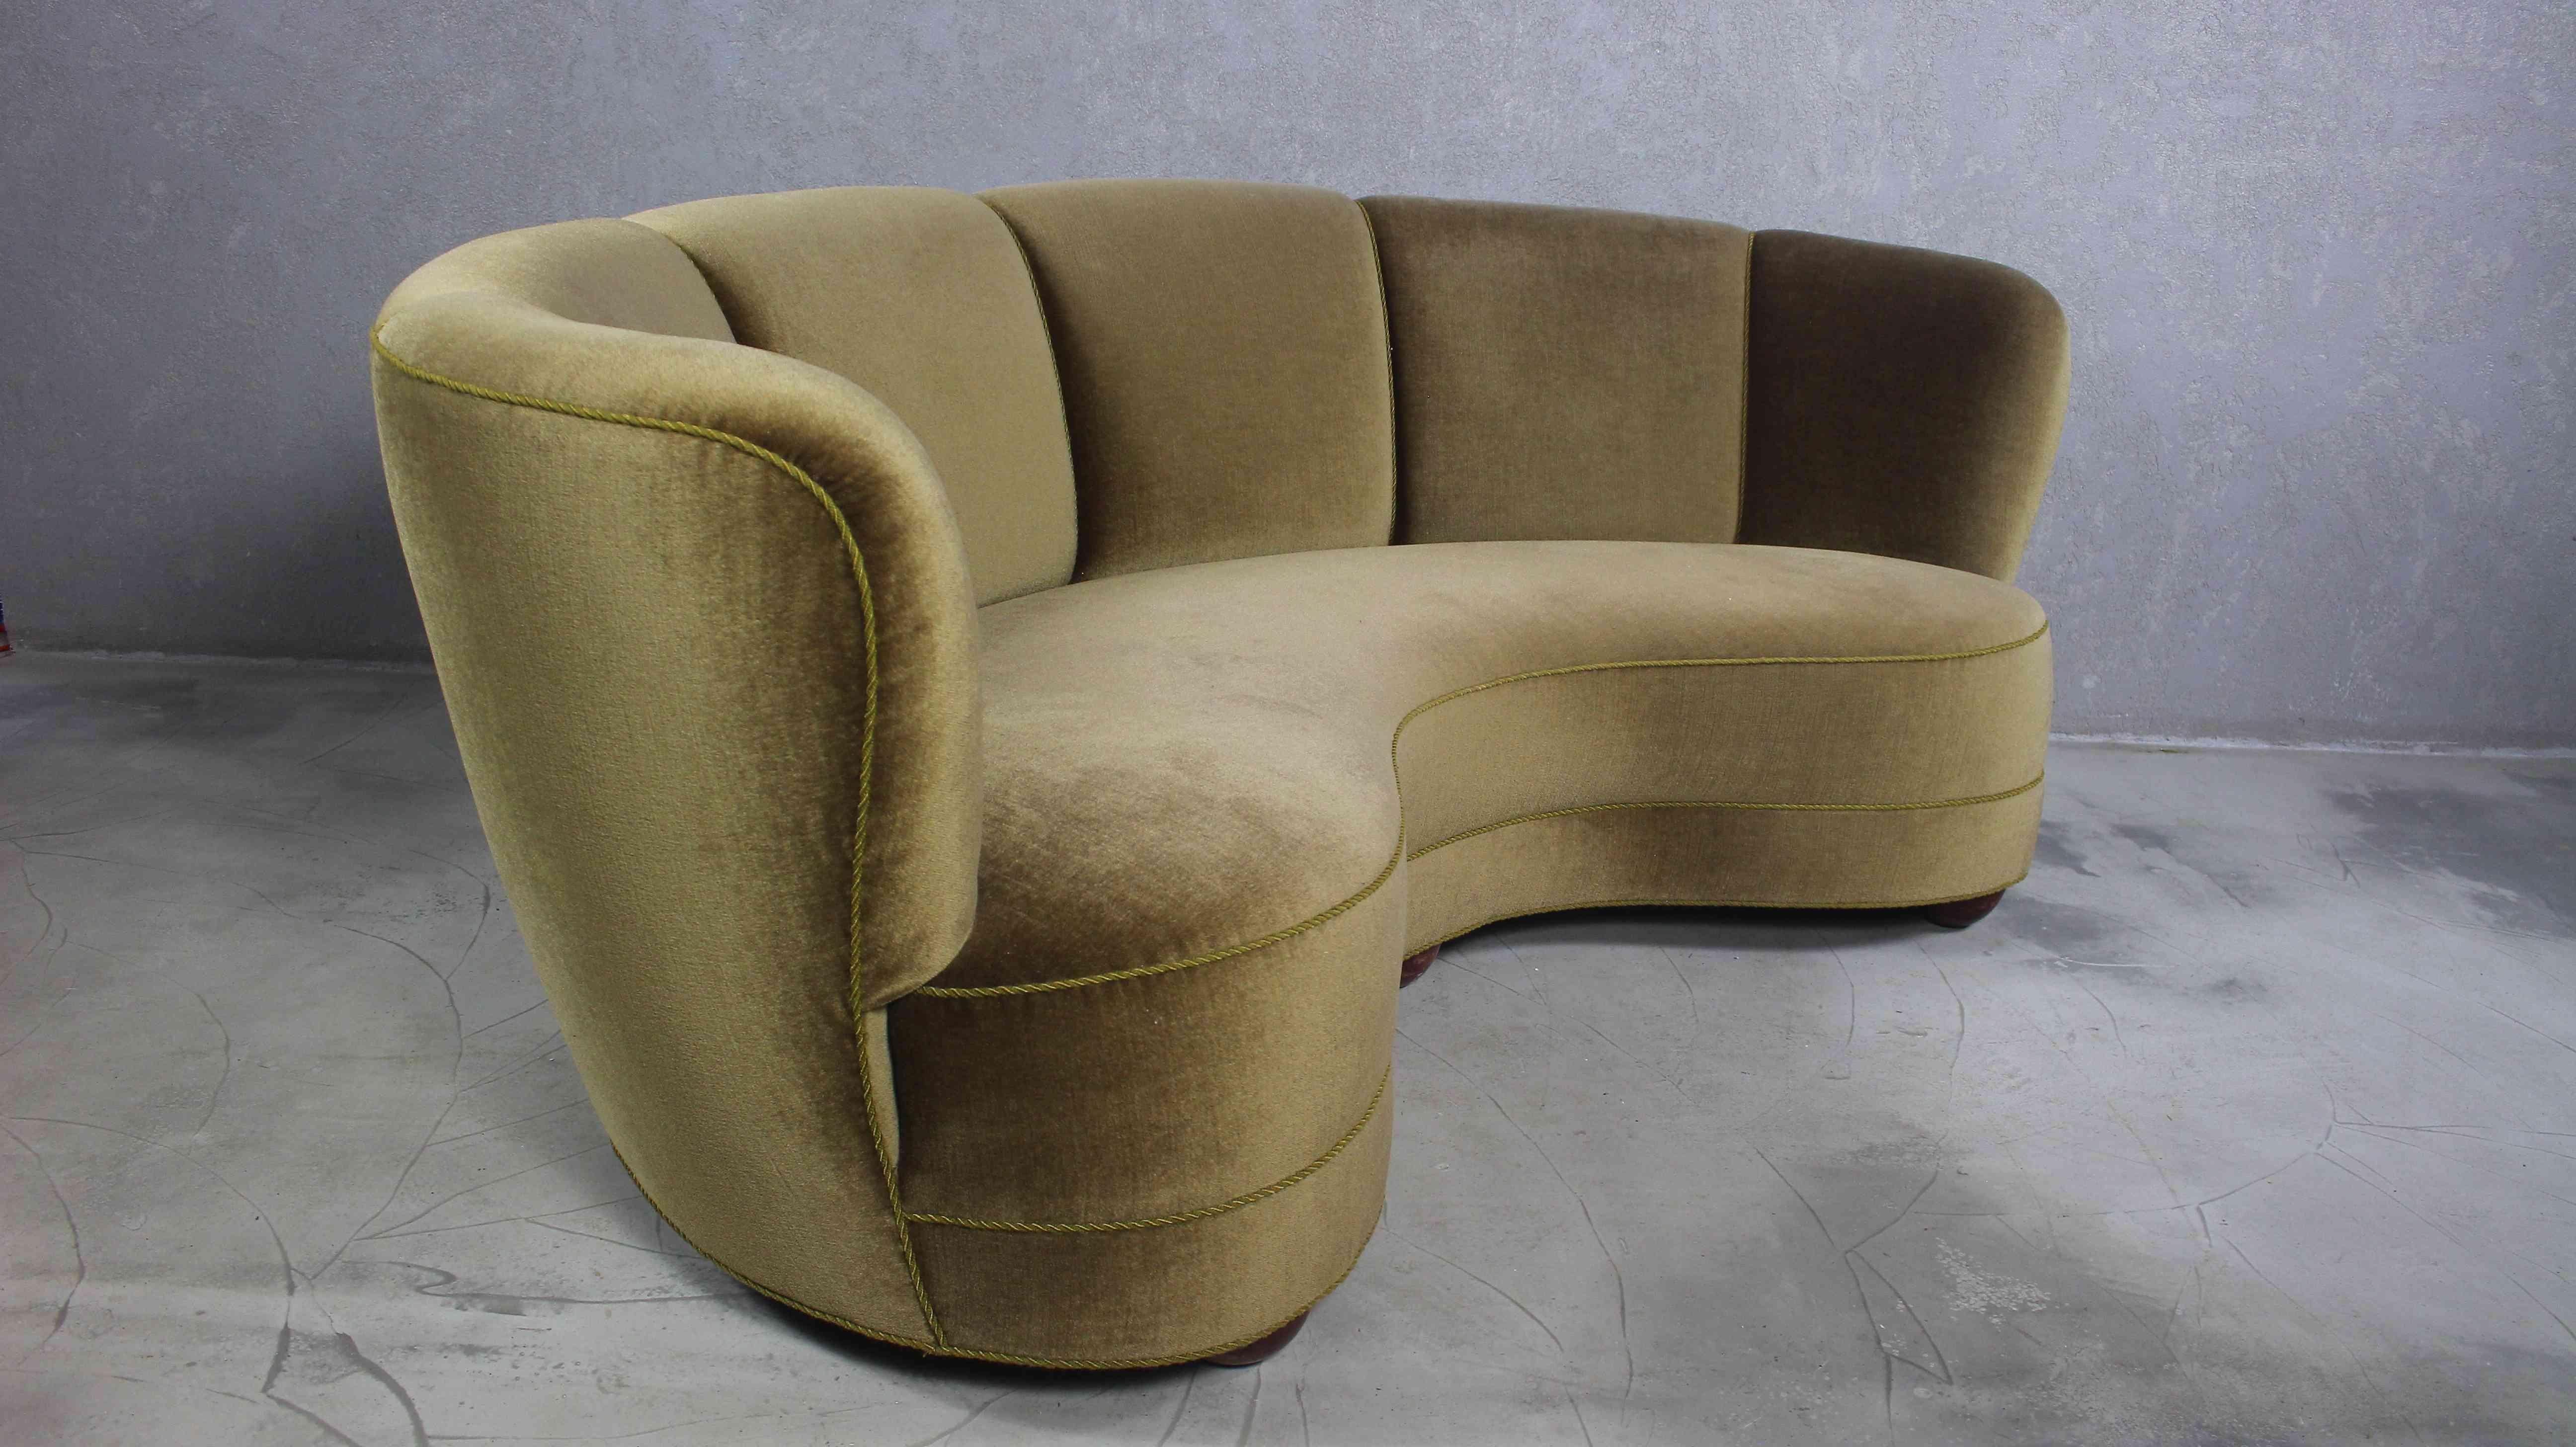 This beautiful Danish three-seater sofa recalls the Art Deco style of the 1930s with the recognizable touch of Danish Modernism.
Thanks to its elegantly curved shape, this type of sofa is often referred to as the “banana” style.